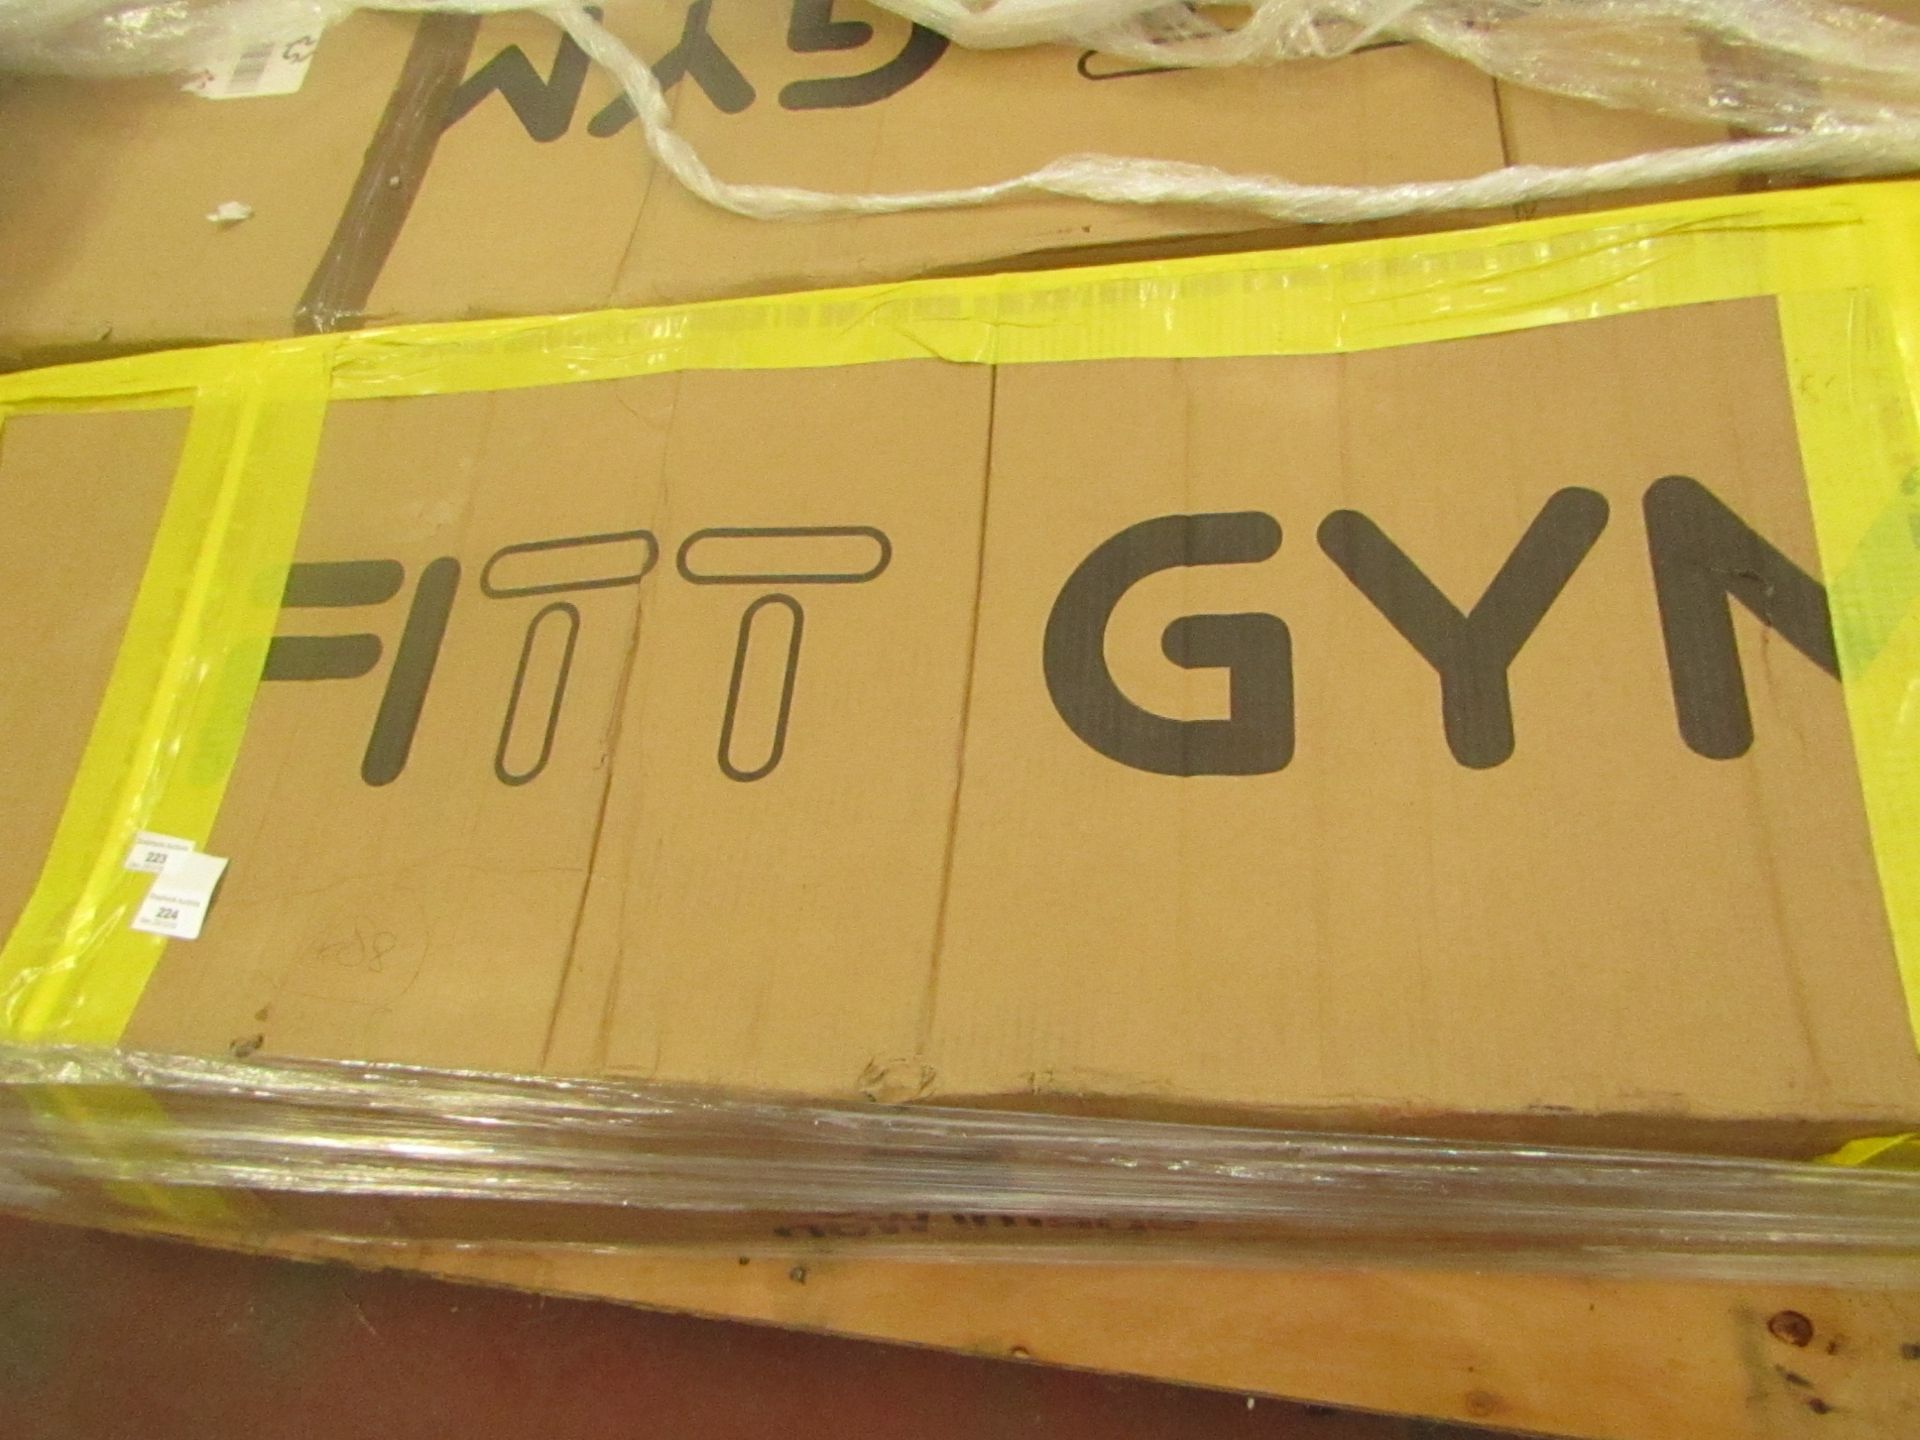 |1x | New Image Fitt Gym | Looks new & unused , unchecked for completeness | No online resales |